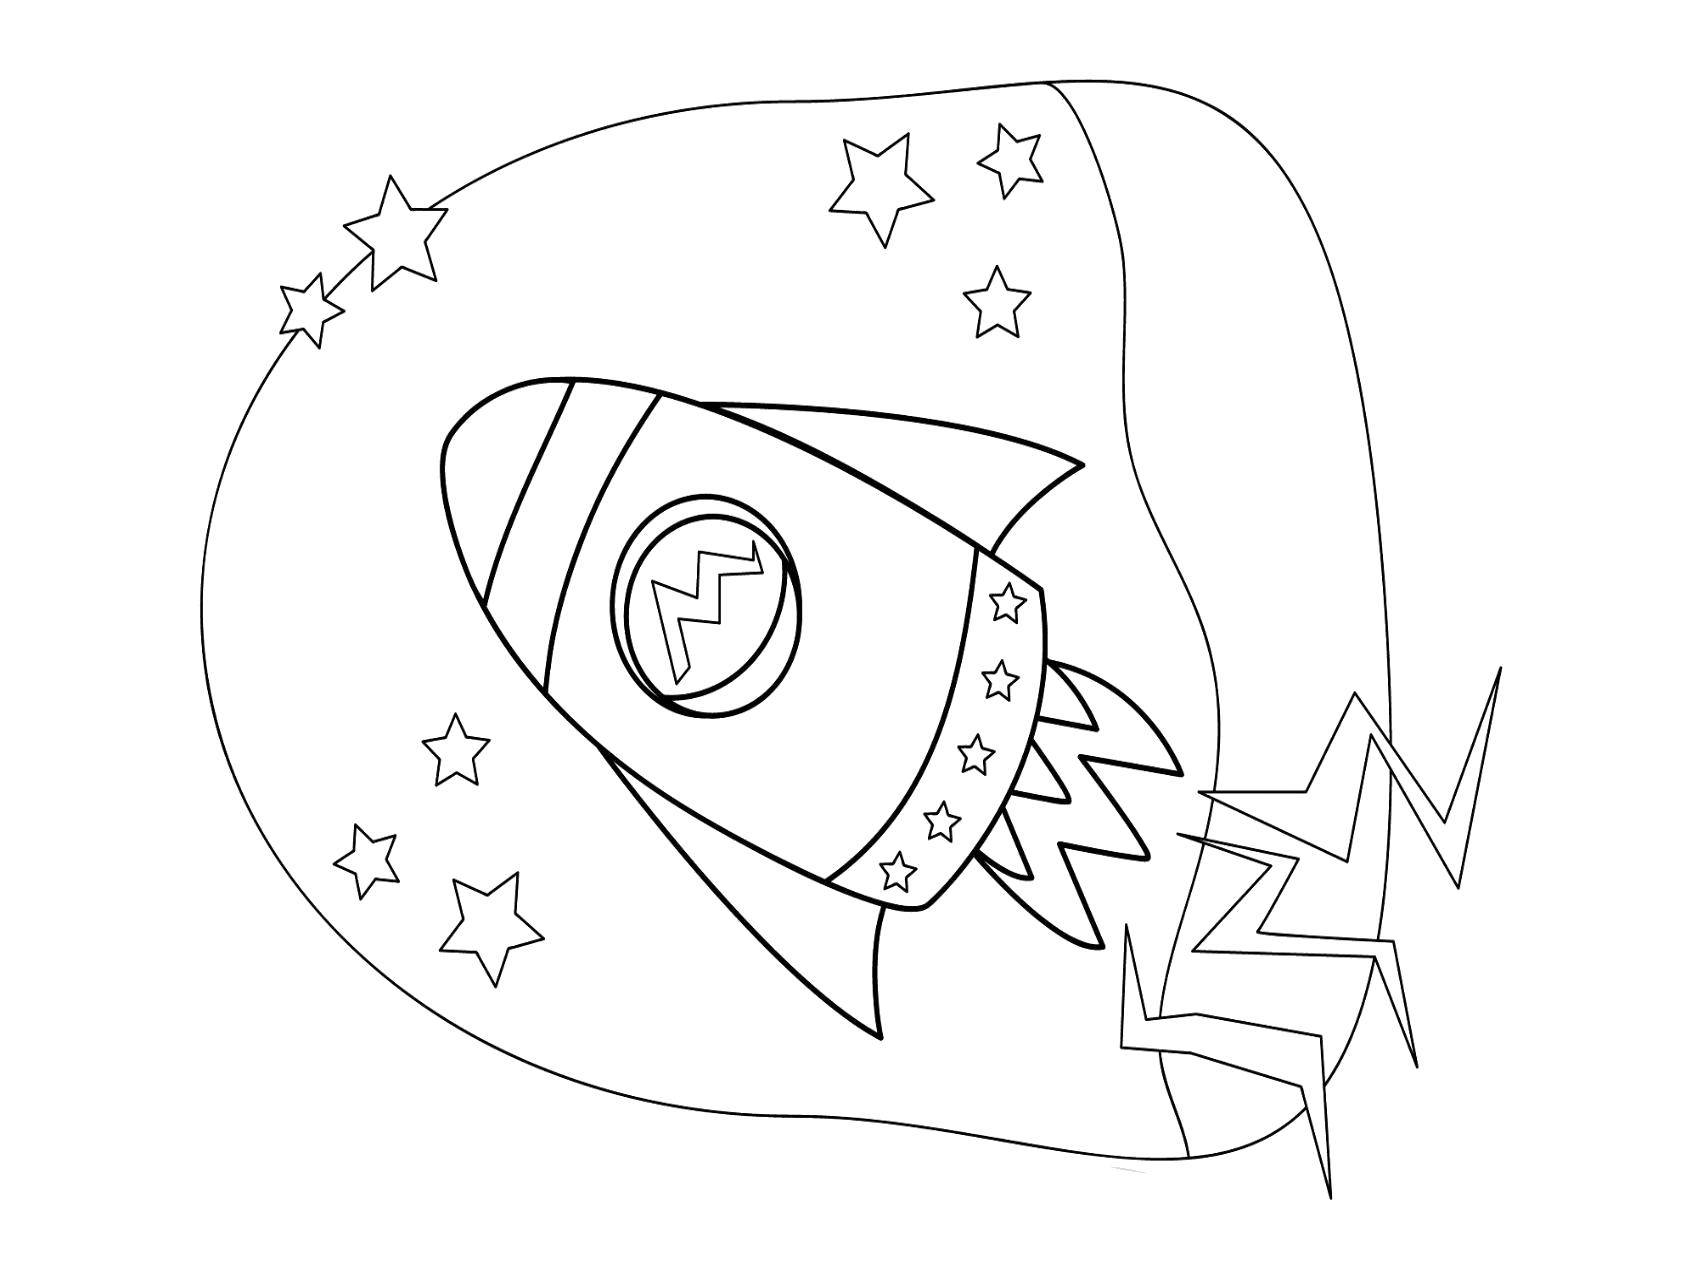 Coloring The rocket flies in space. Category rocket. Tags:  Space, rocket, stars.